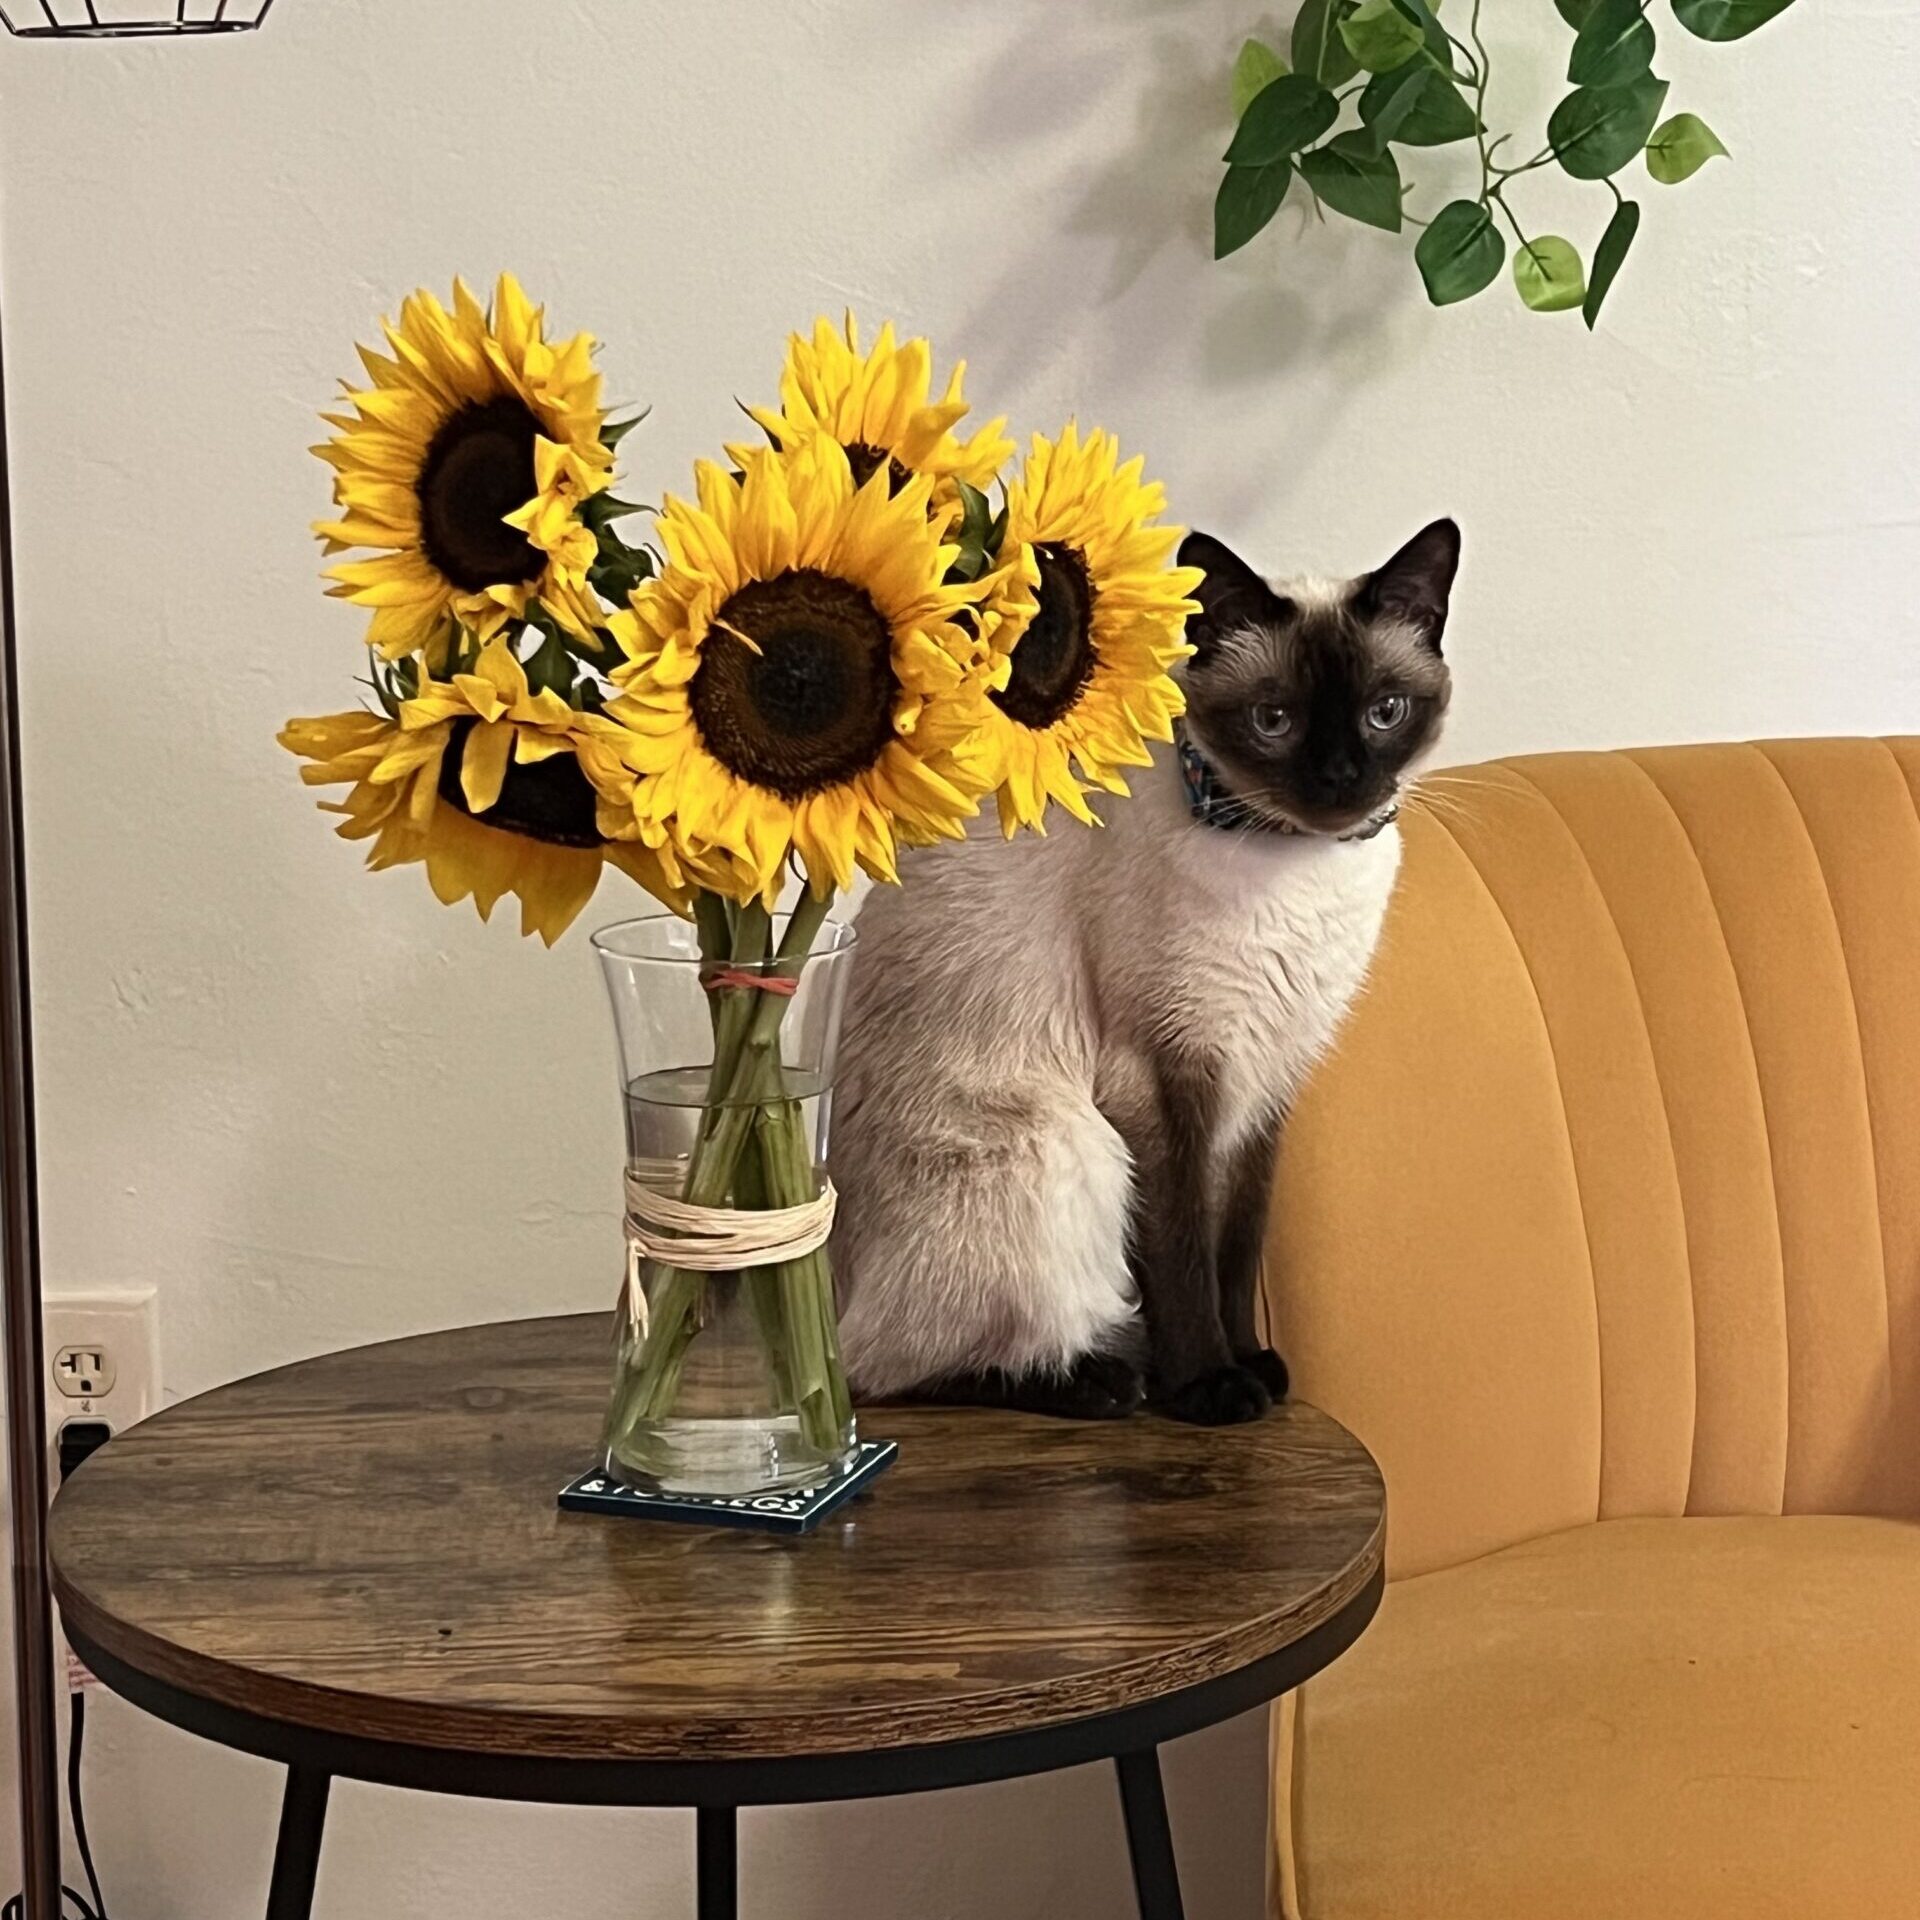 Siamese cat next to a vase of sunflowers